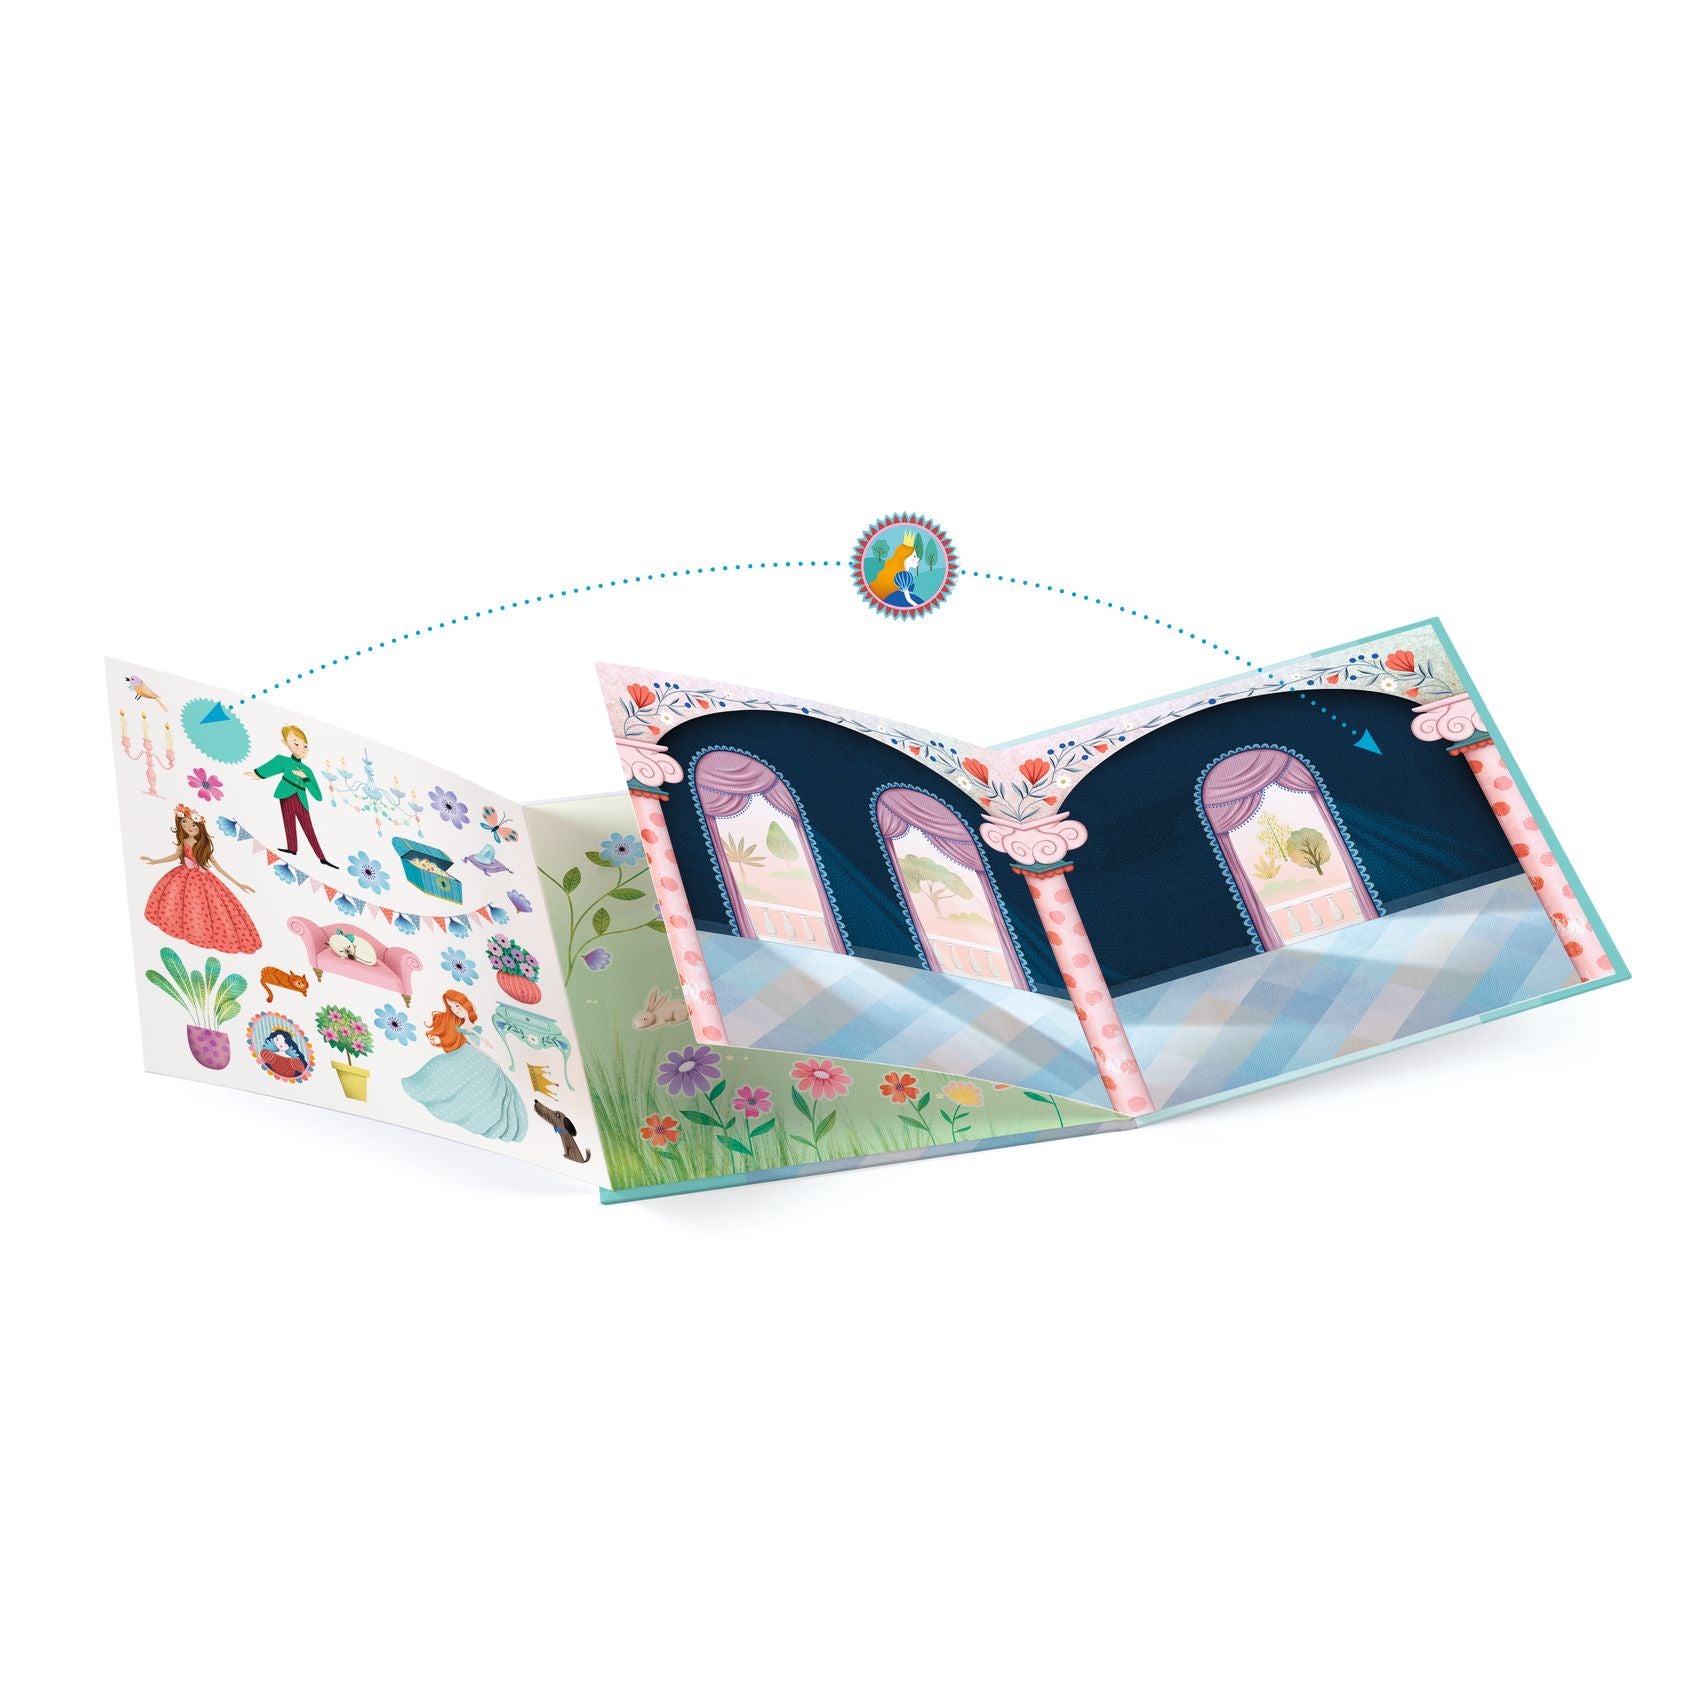 Djeco Life In The Castle with Reusable Stickers